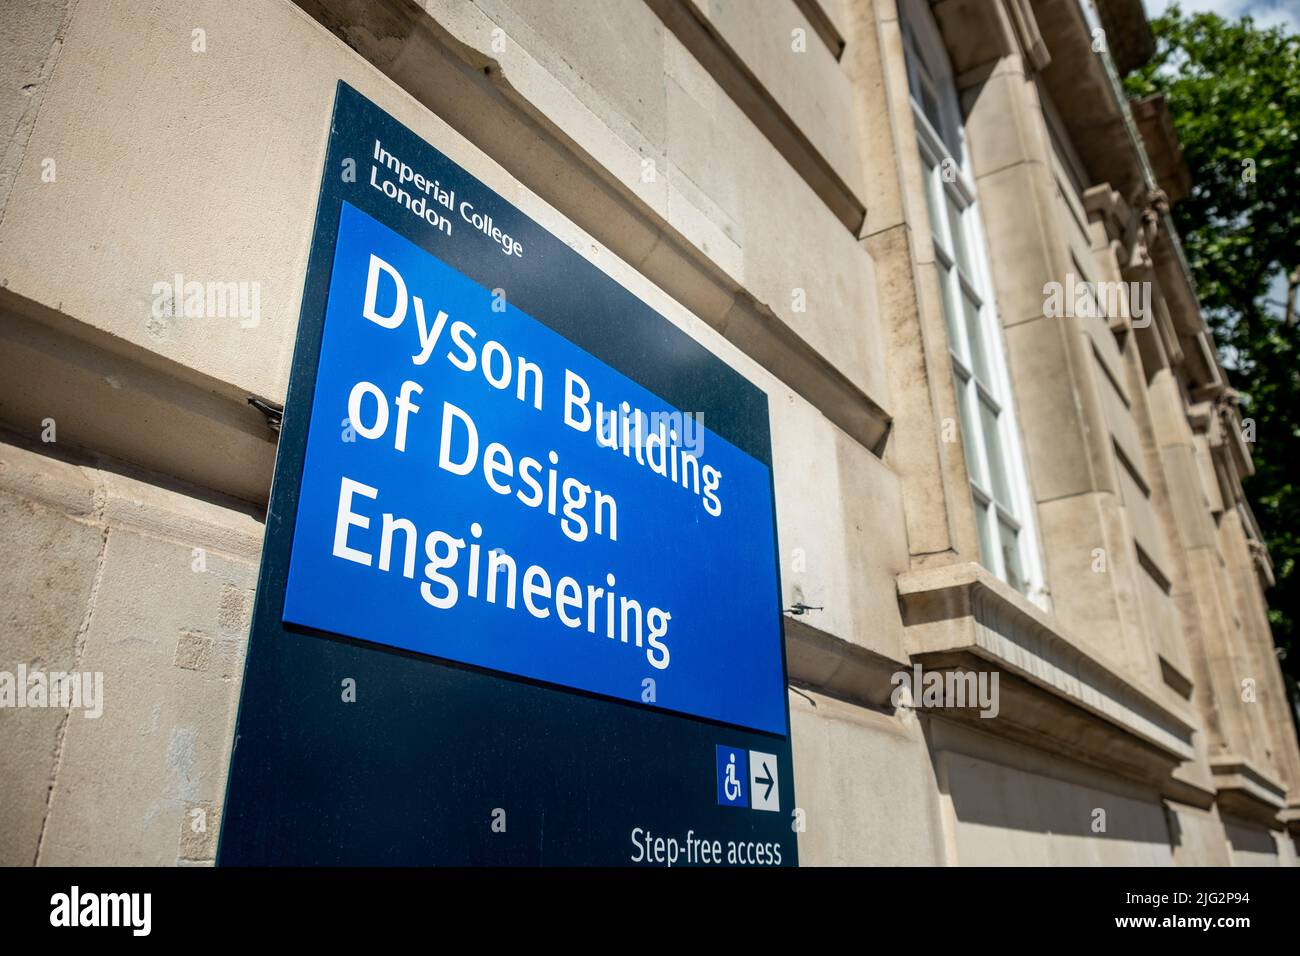 London - Juni 2022: Dyson Building of Design Engineering, Imperial College London Stockfoto